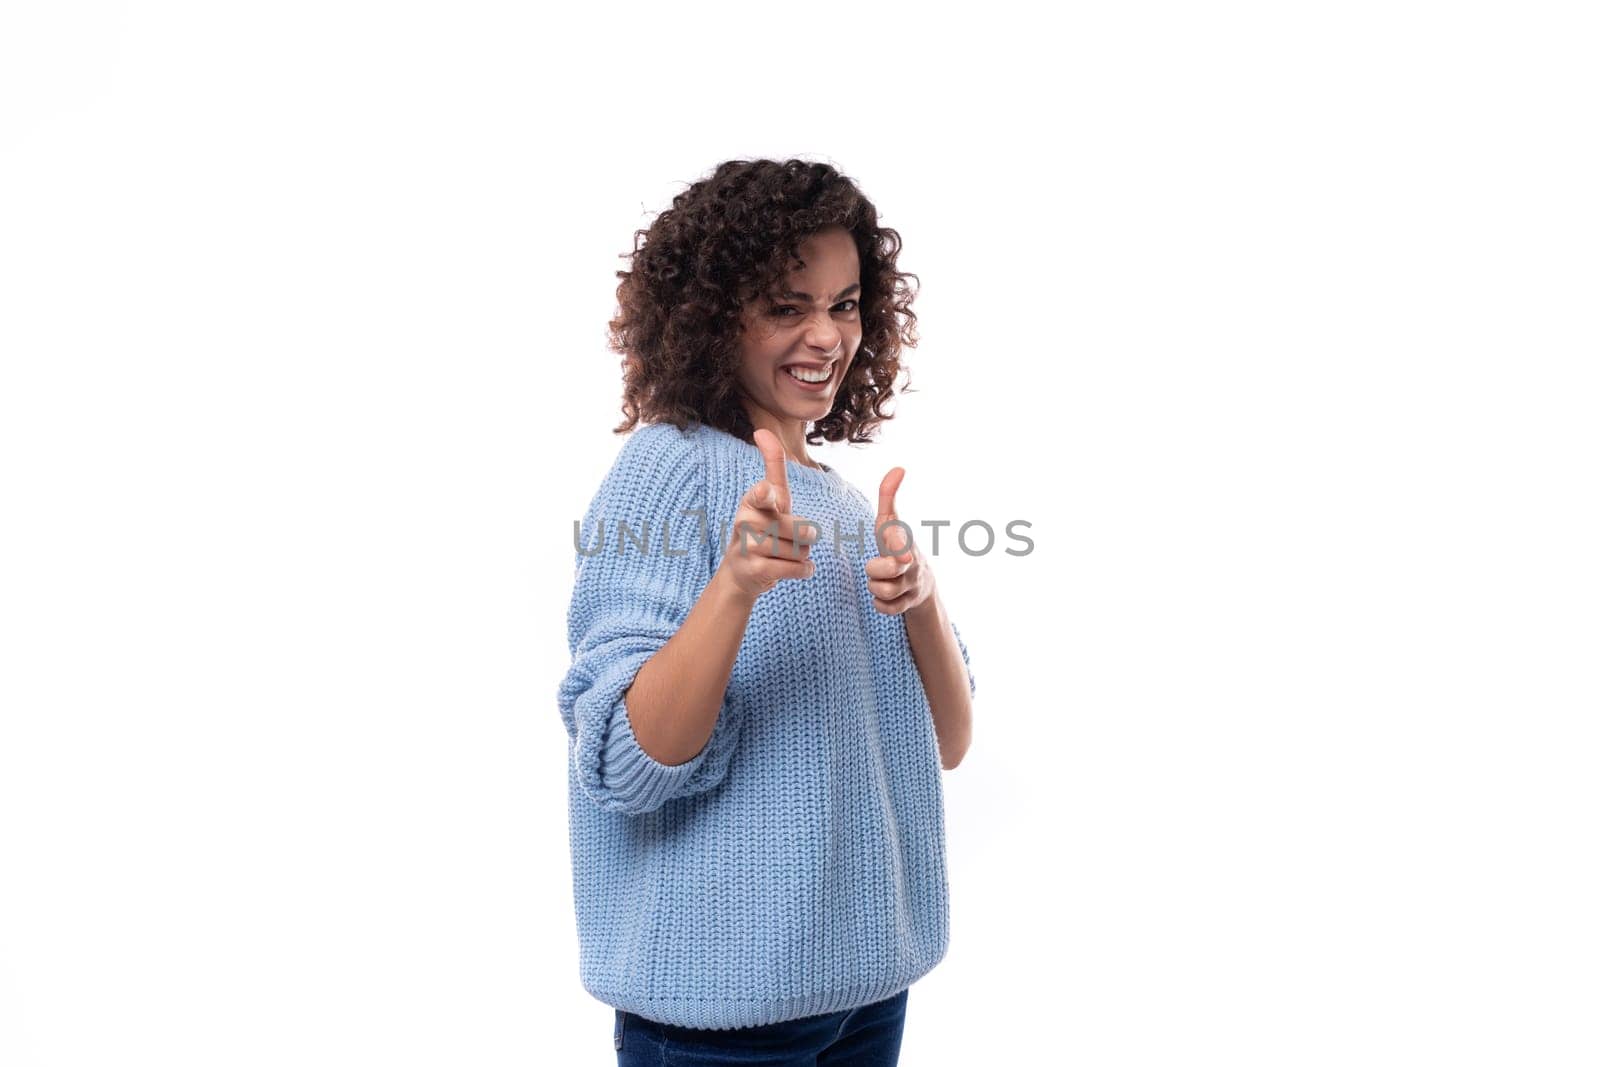 portrait of a charming young caucasian woman with curly dark hair dressed in a casual warm blue blouse on a white background with copy space.